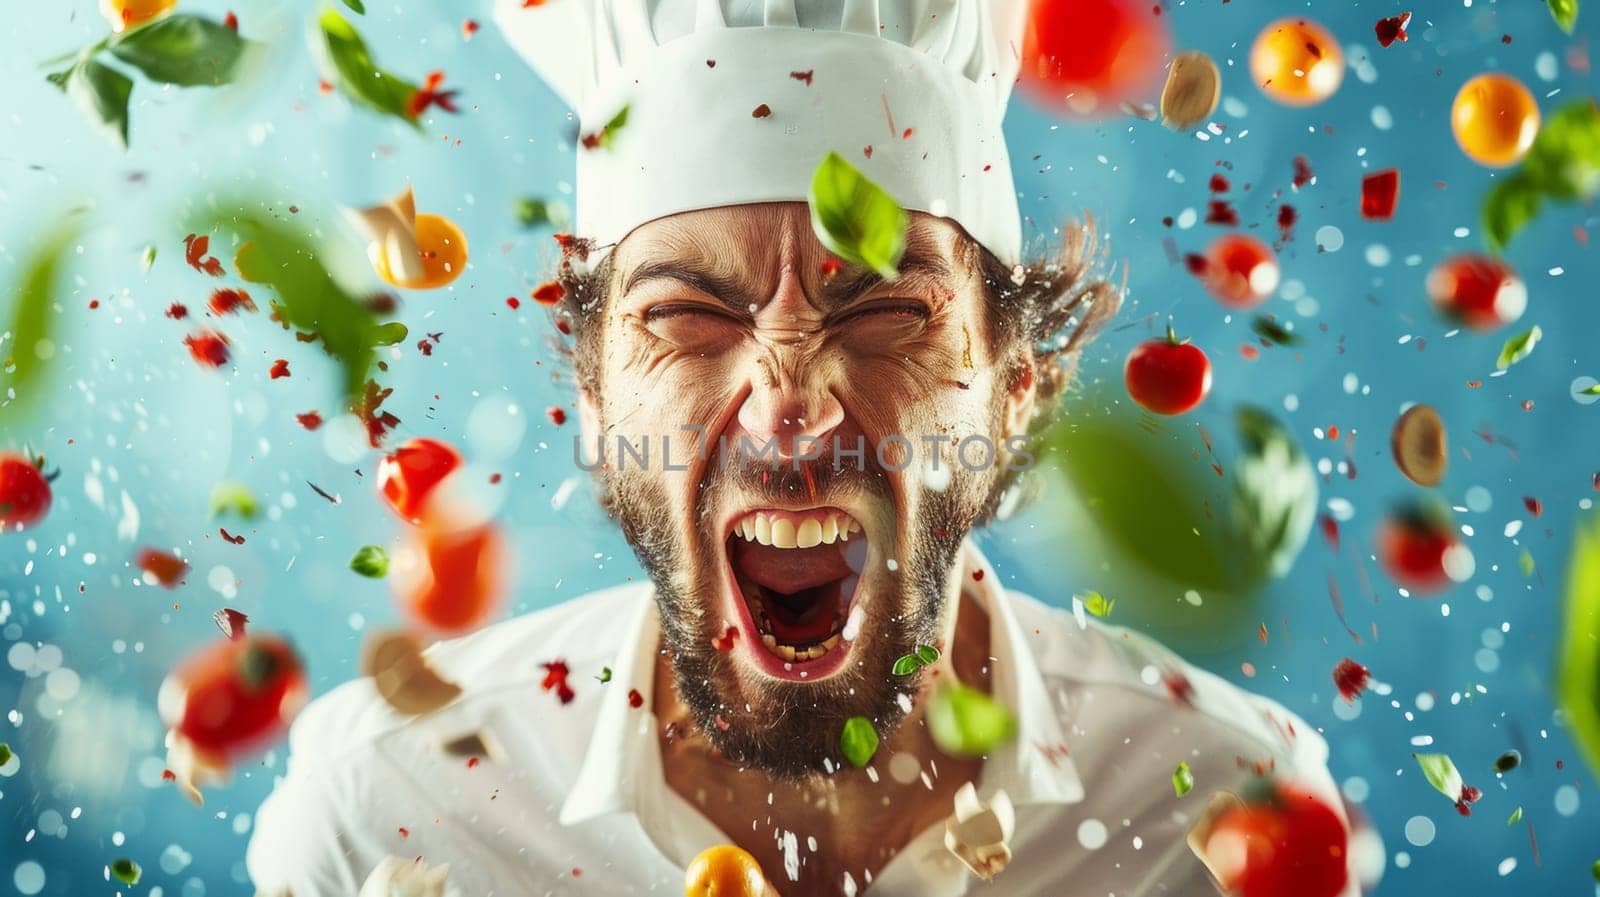 A man in a chef hat with fruit flying around him